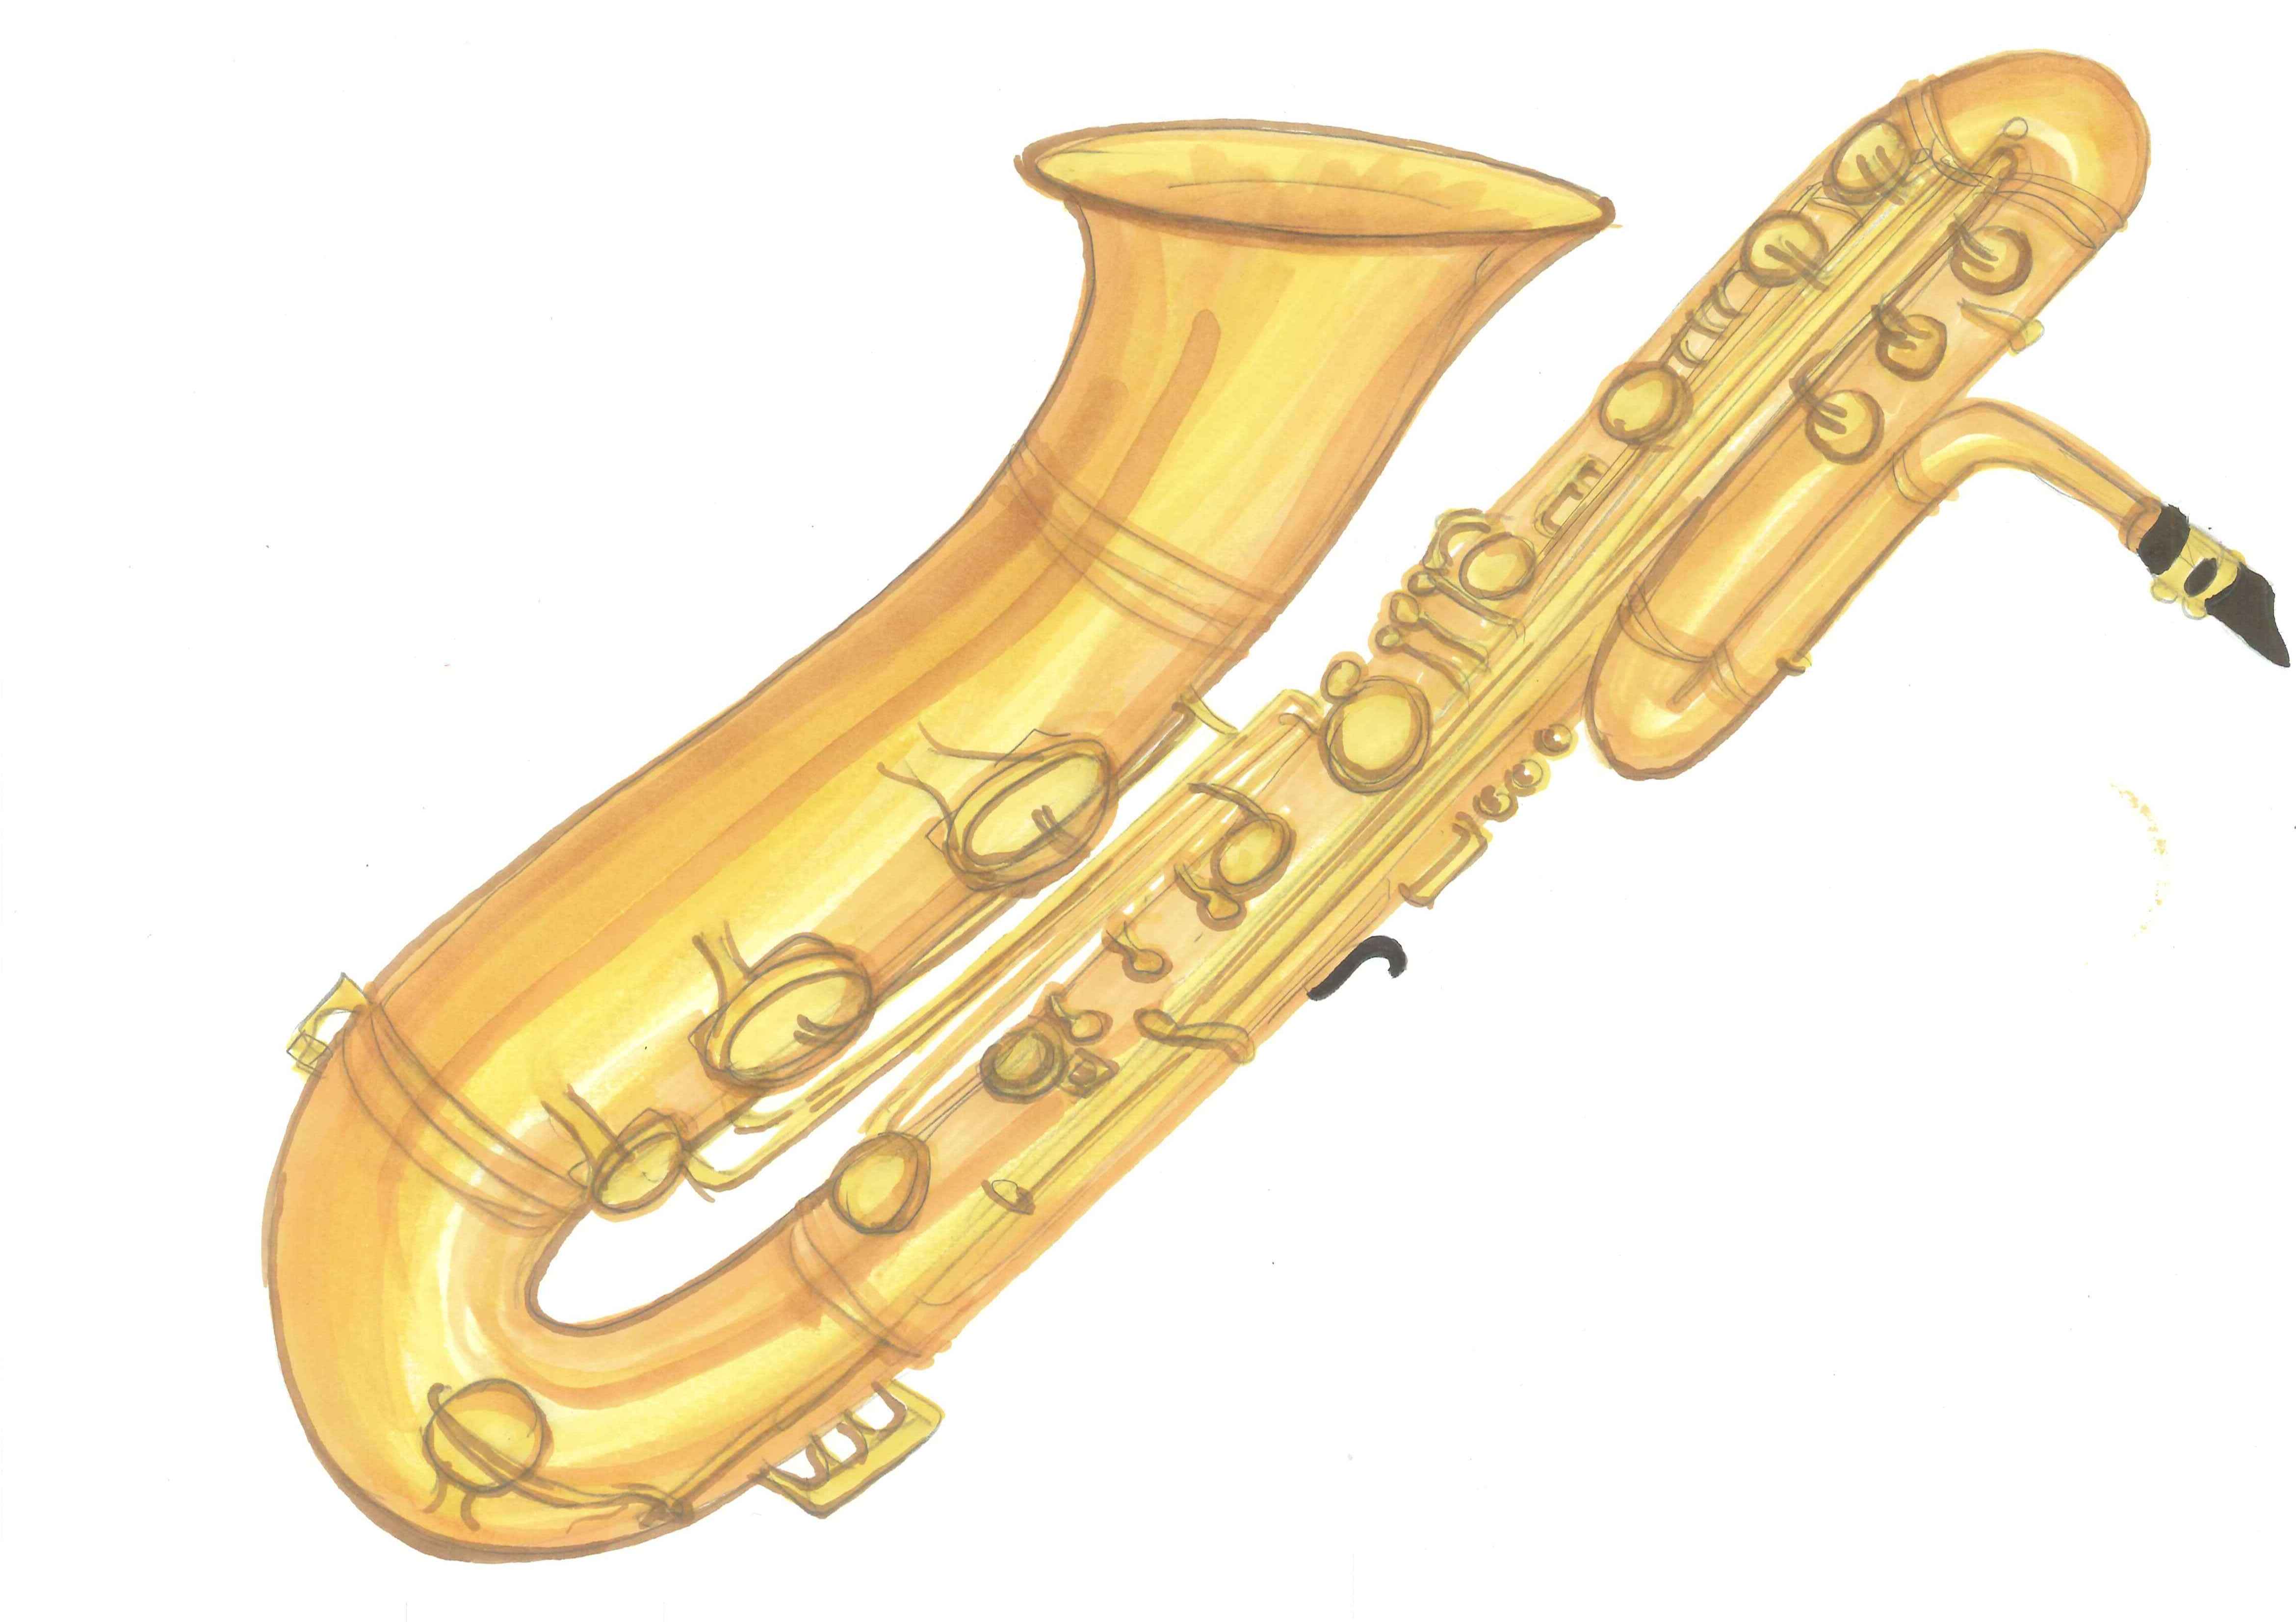 About Musical Themusical Instruments Andthe Musical Art Music Clipart